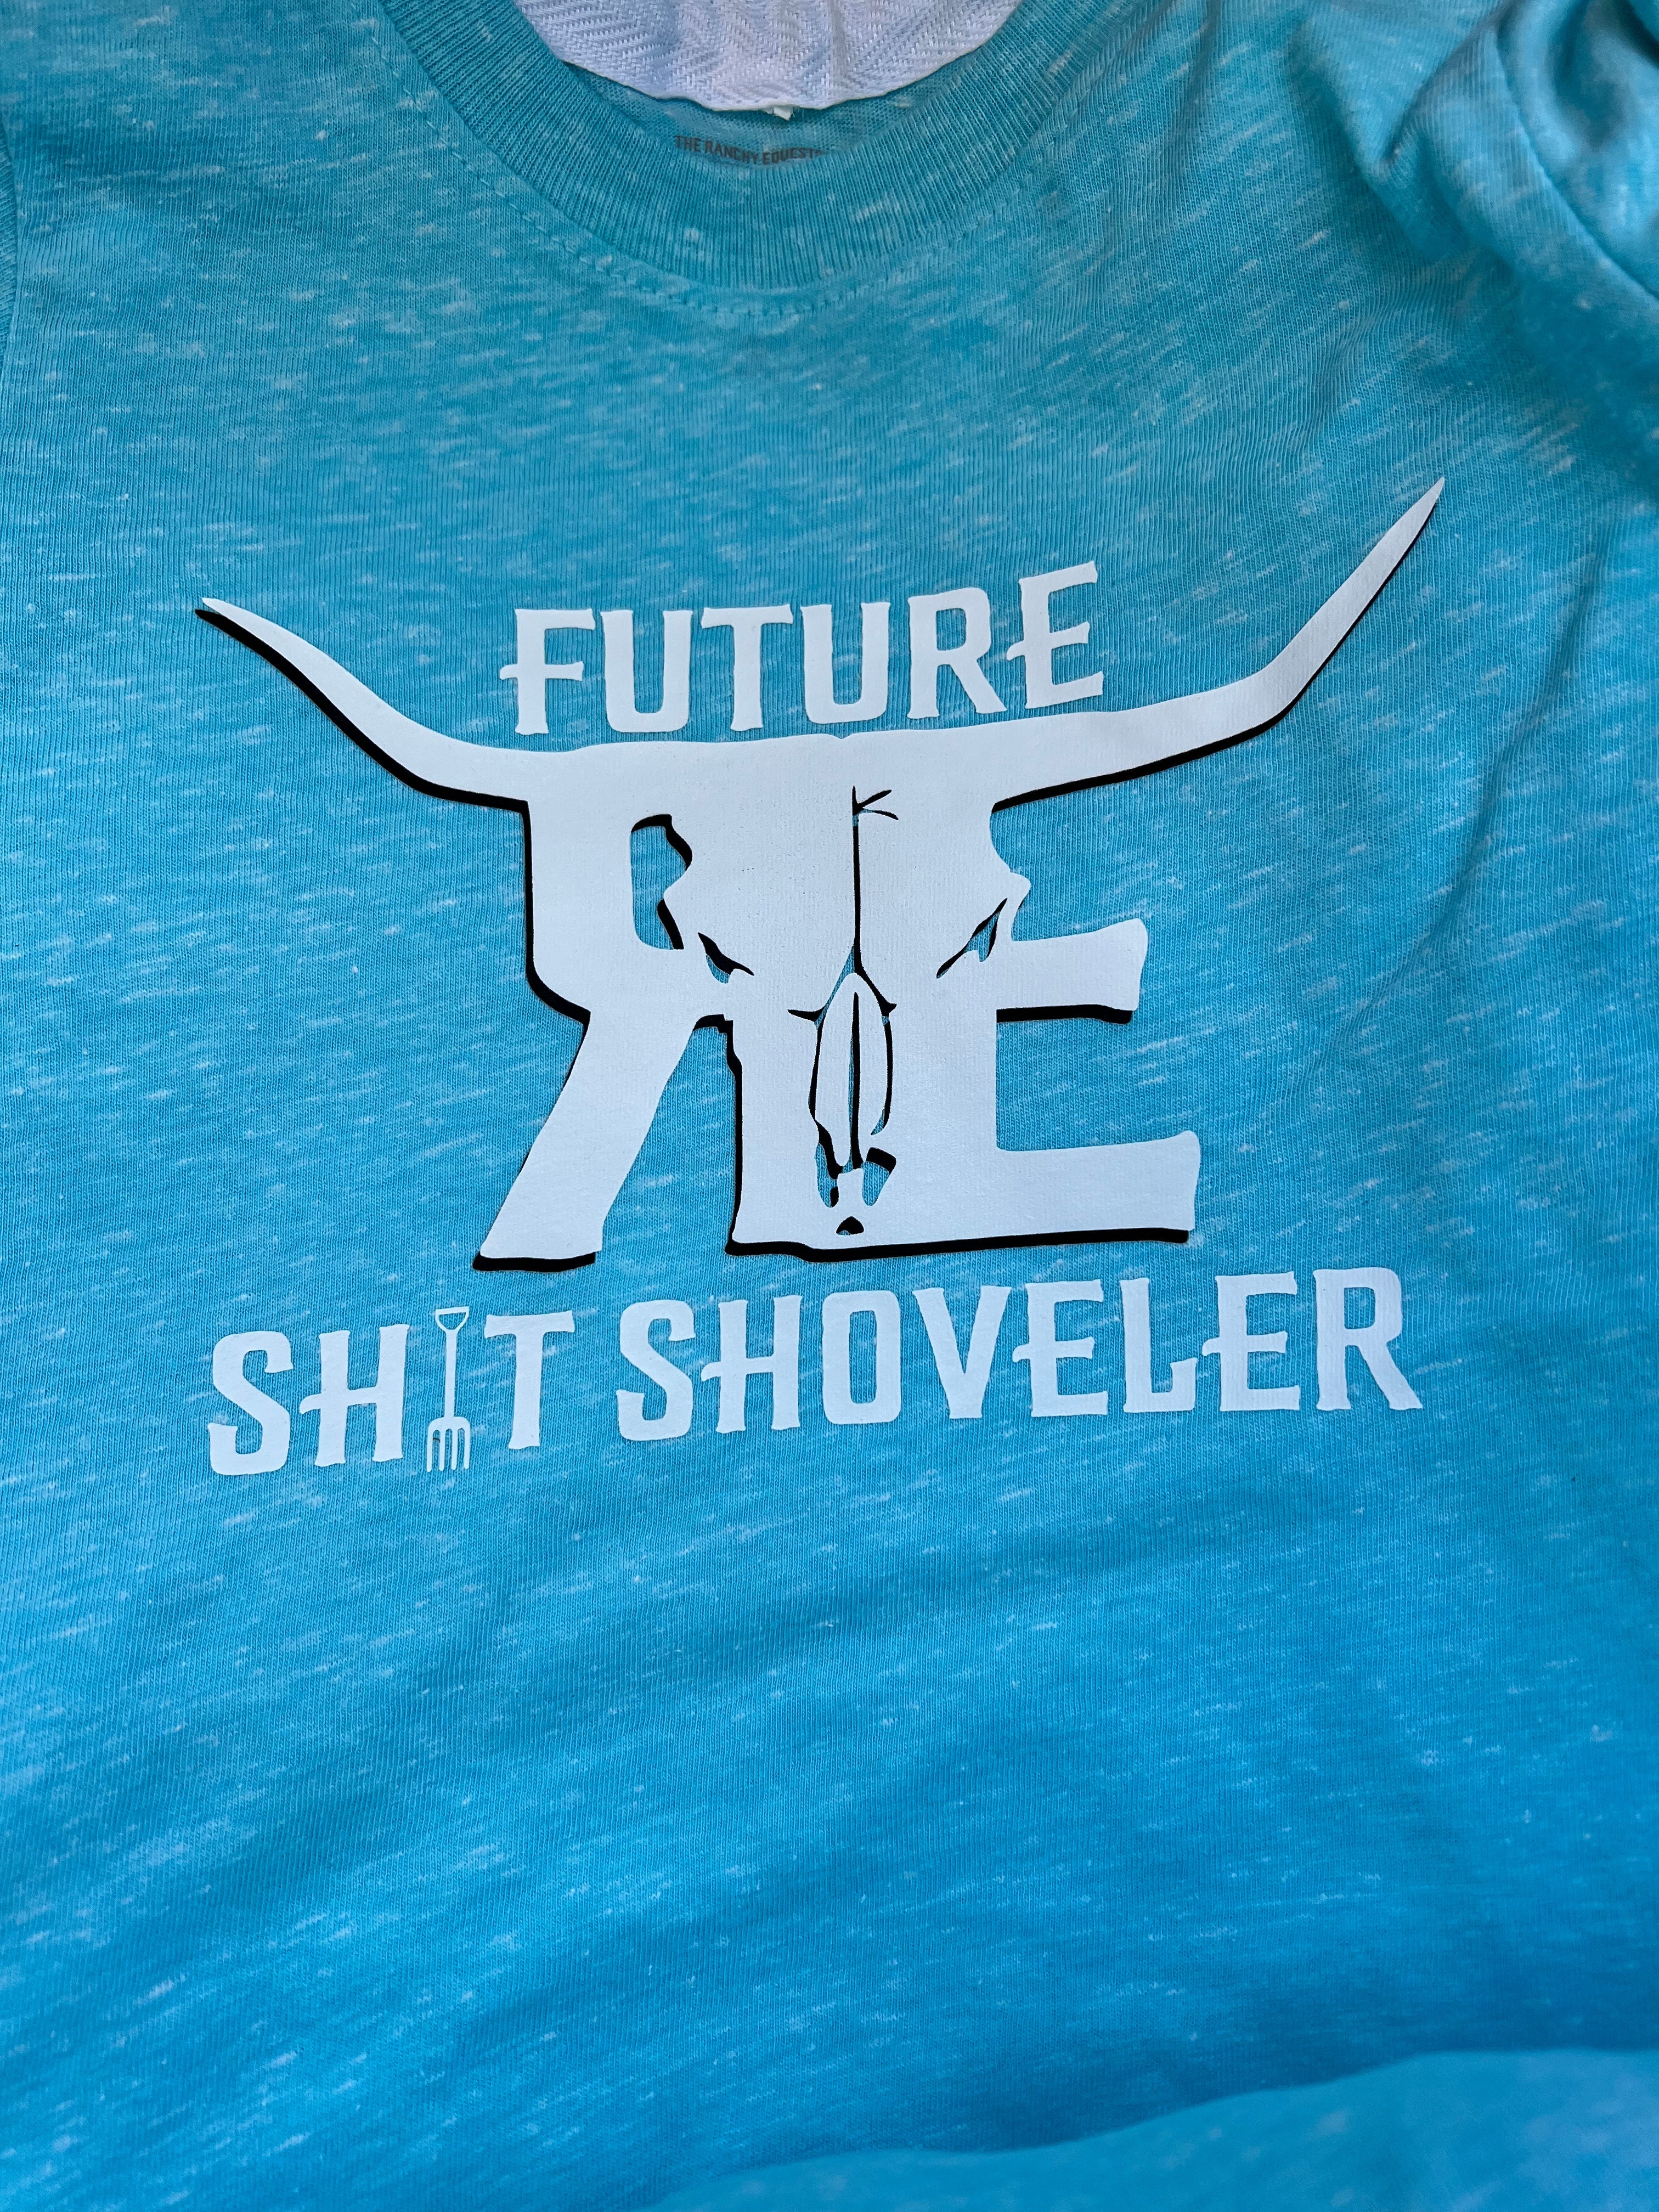 future sh!t shoveler with ranchy bullhorns logo in white on a teal blue tee shirt for toddlers